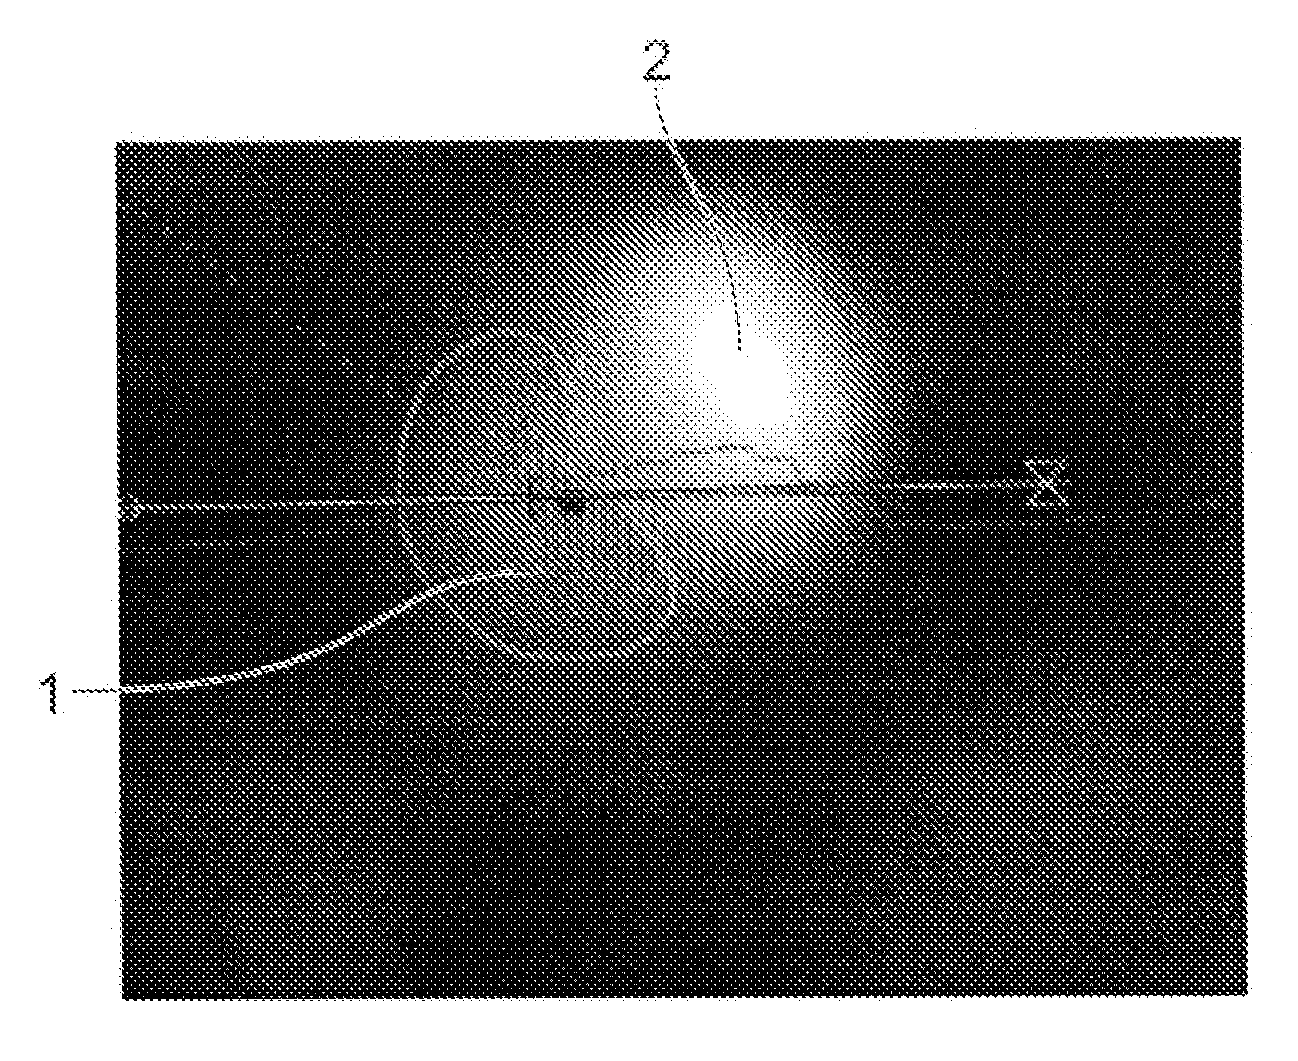 Method and system for identification of calcification in imaged blood vessels